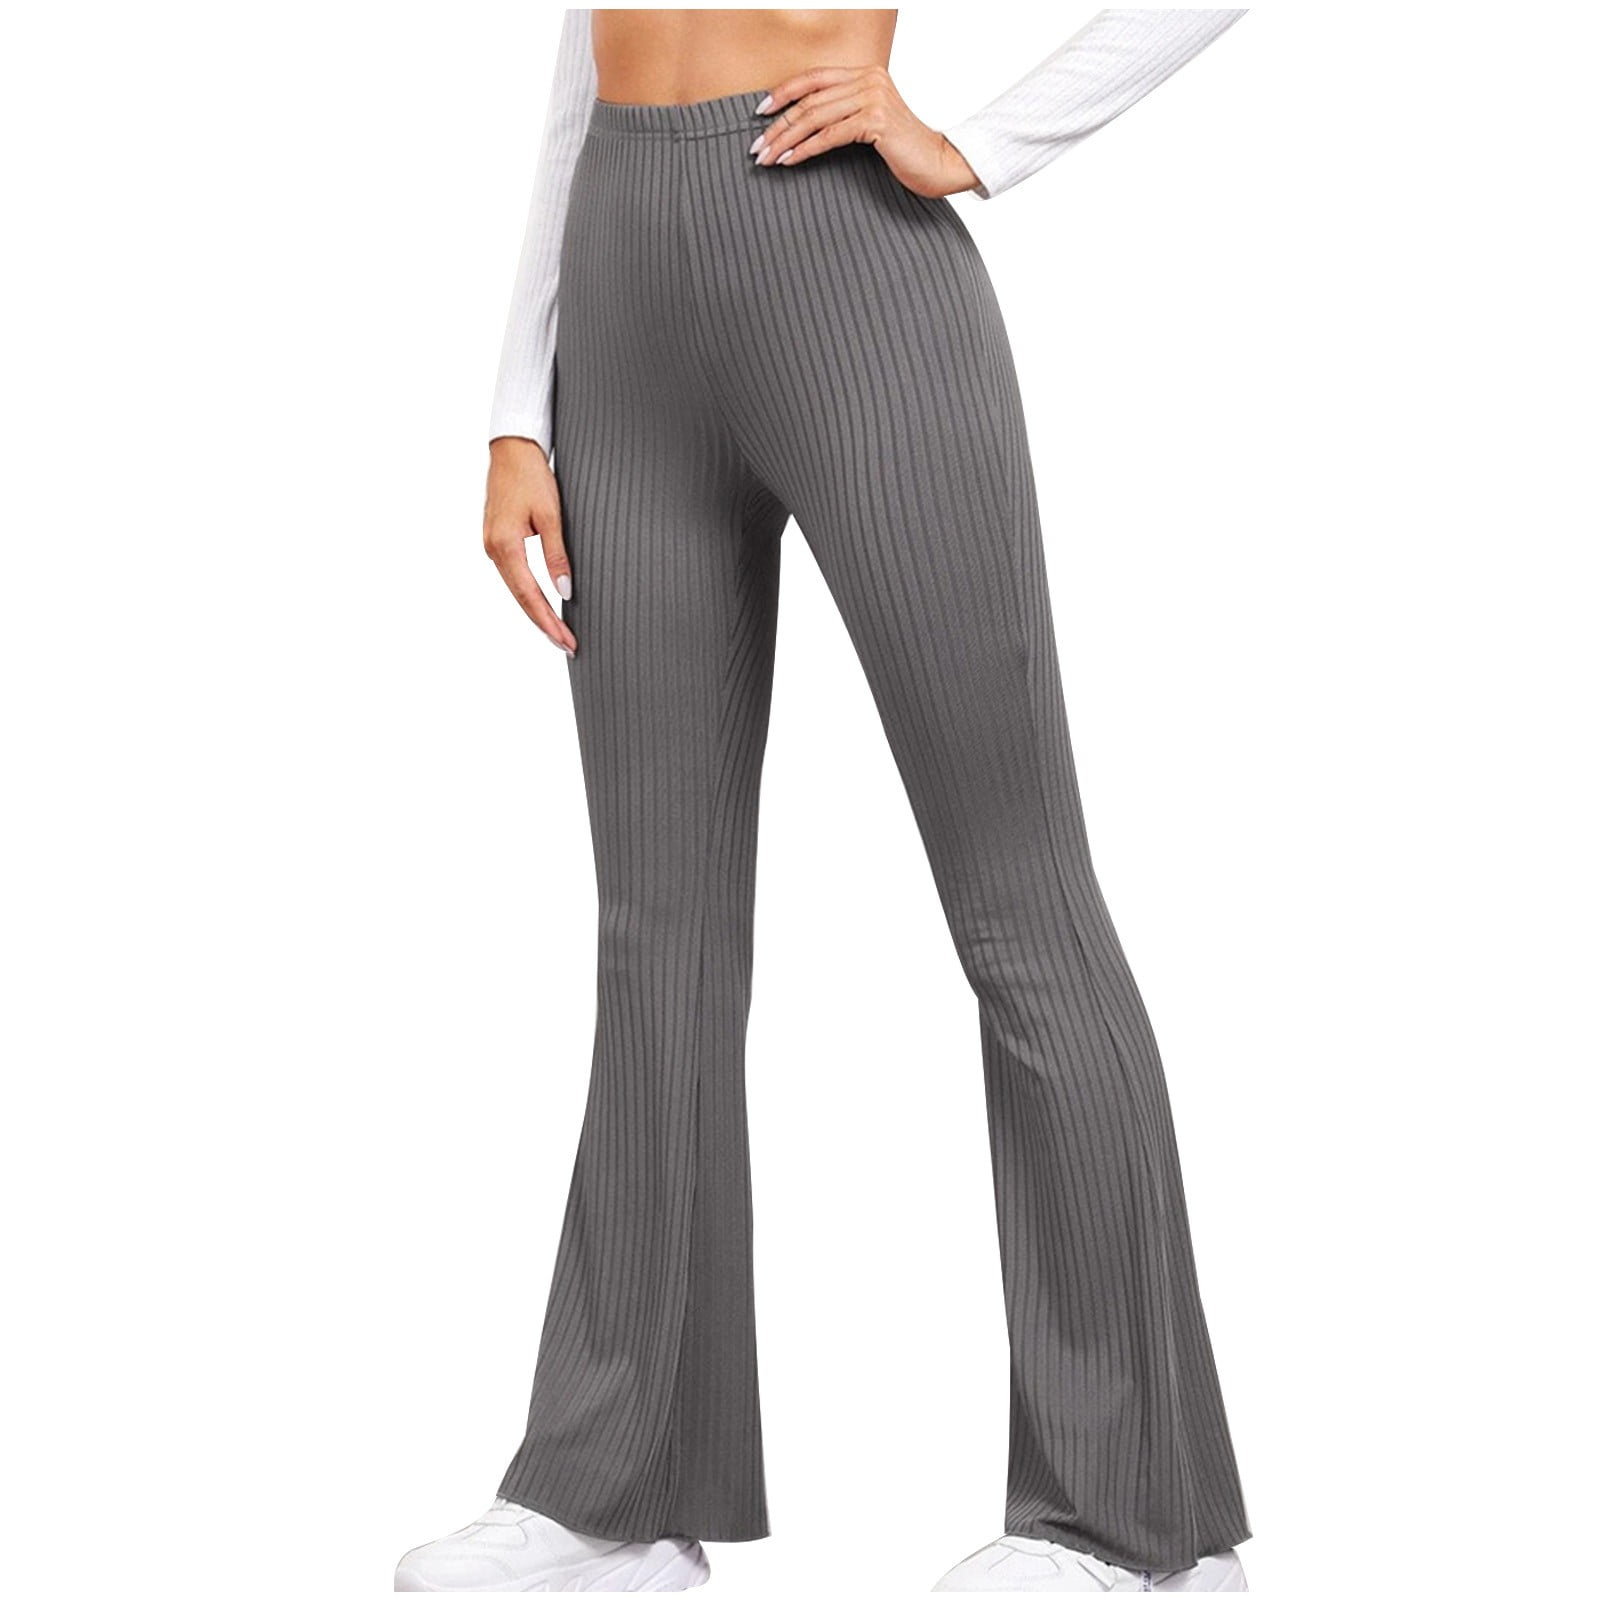 JWZUY Flare Pant Ribbed Knit Pants for Women Bootcut High Waisted Leggings  Workout Stretch Pants Gray S 